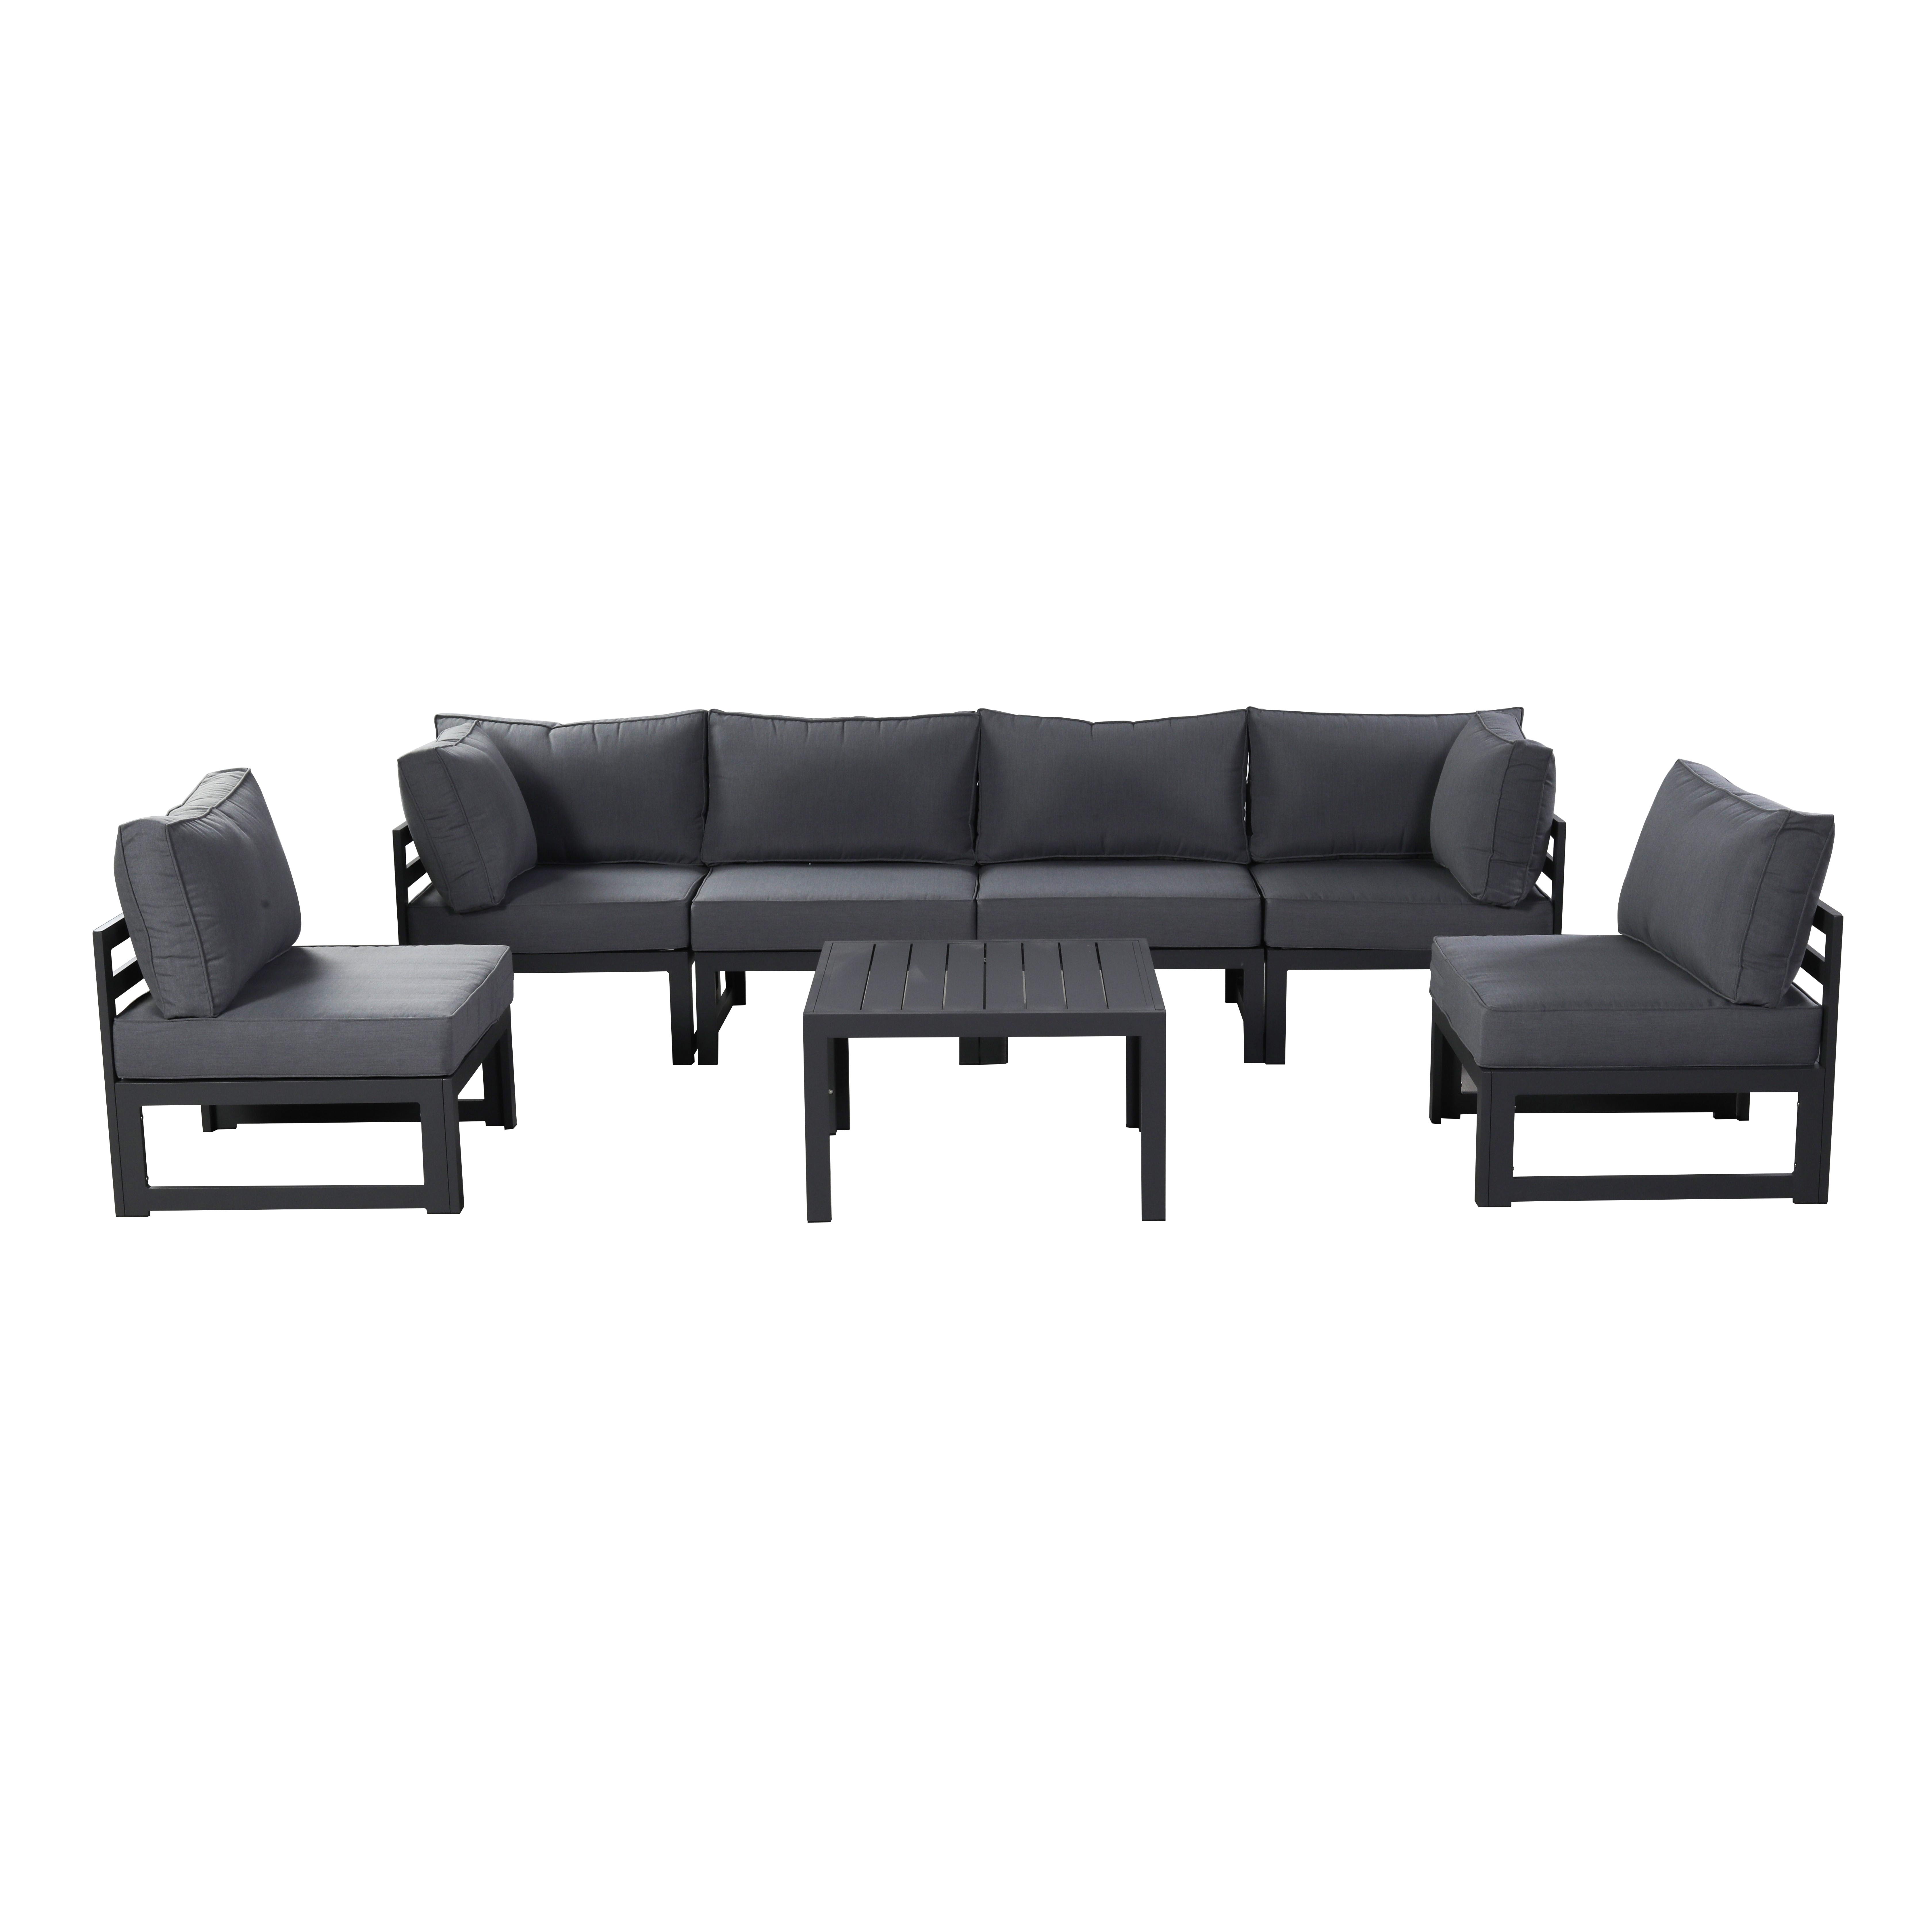 KAIXING HB41.9700 Garden Aluminum Material 6 Seater Sectional Sofas with Coffee Table or Firepit Table Outdoor Set